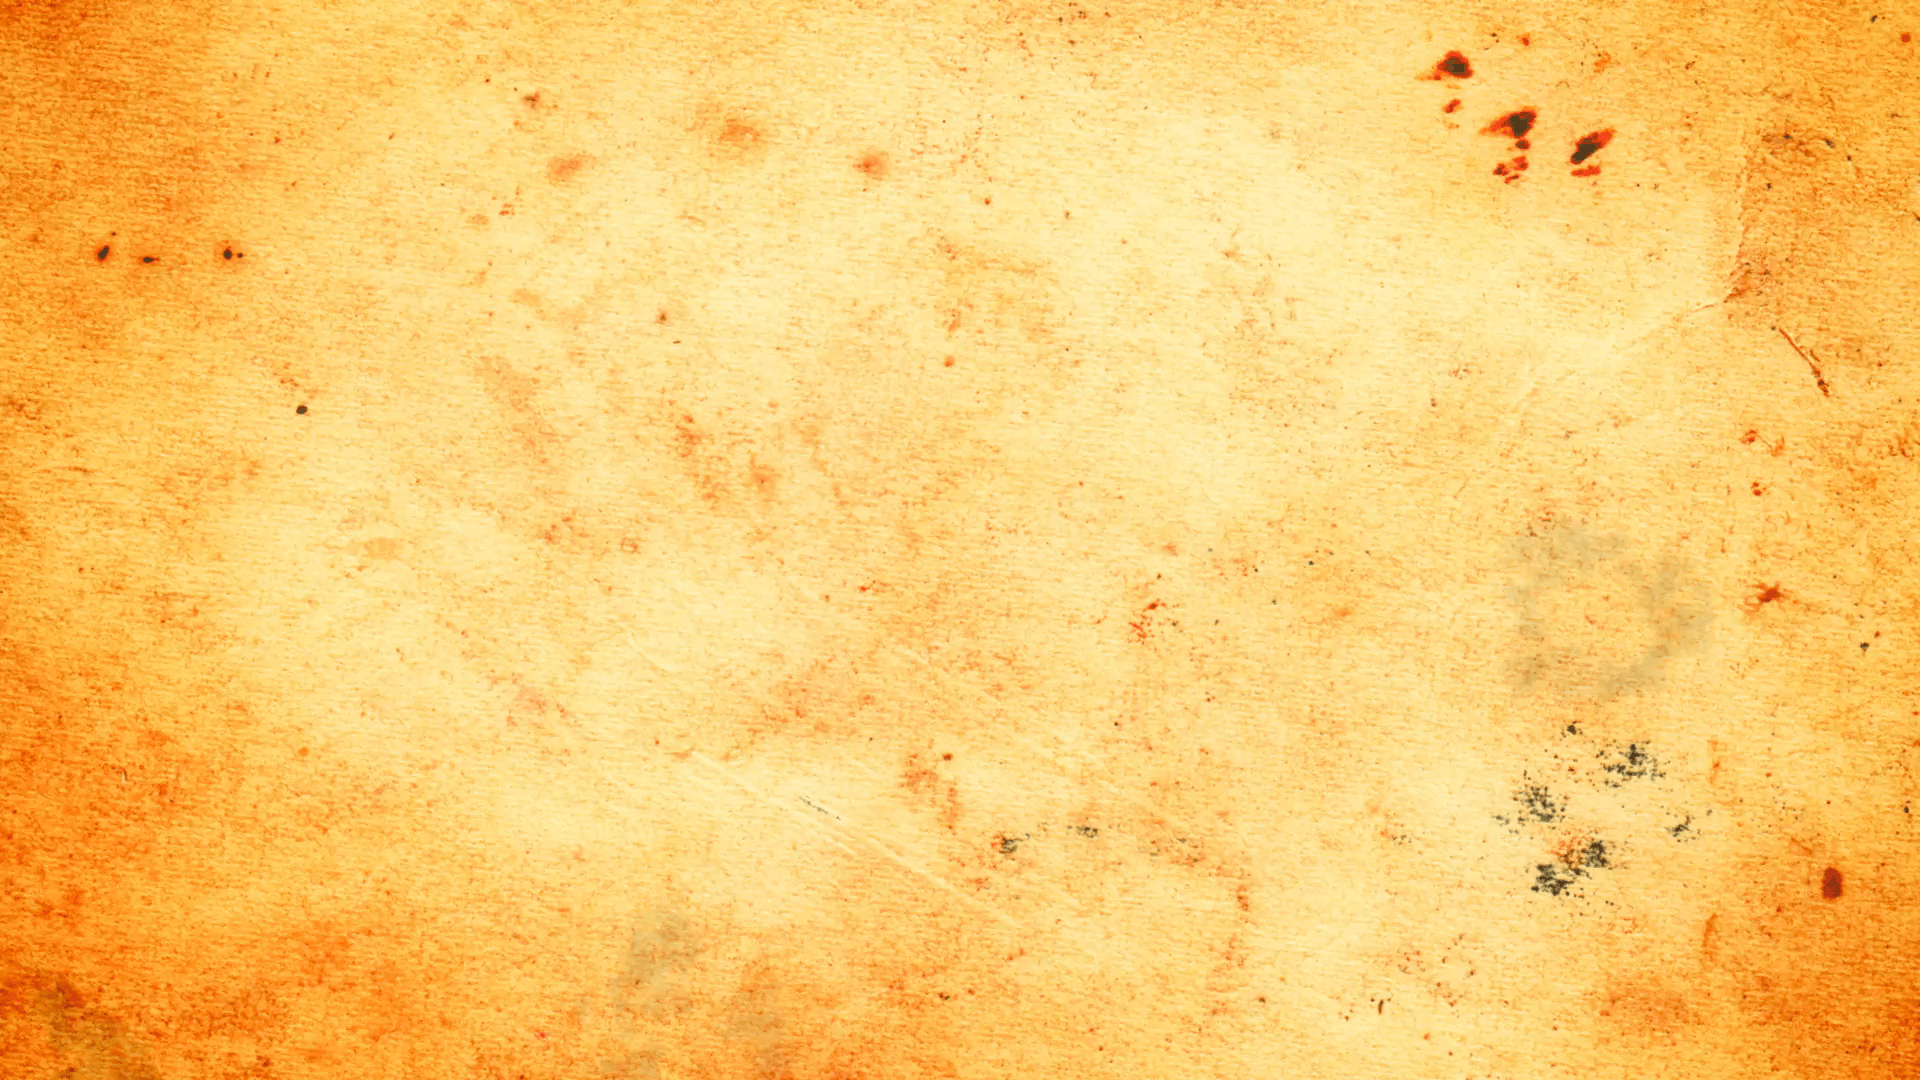 Animated paper texture as HD background with splotches, grain